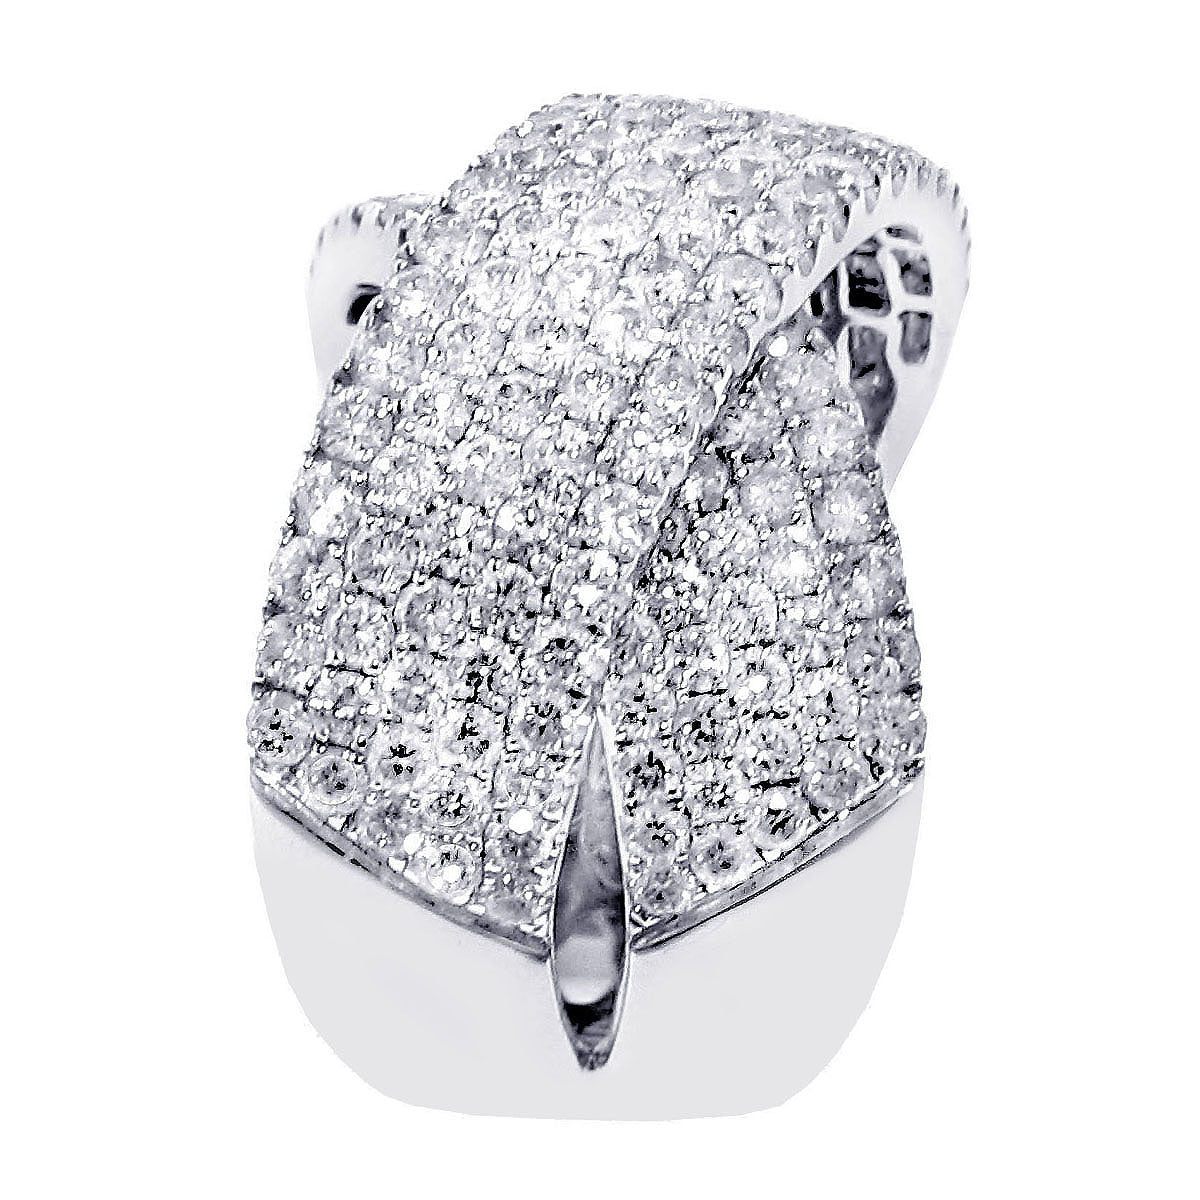 2.65 CT Diamond Crossover Anniversary Ring in 14k White Gold Pave Setting